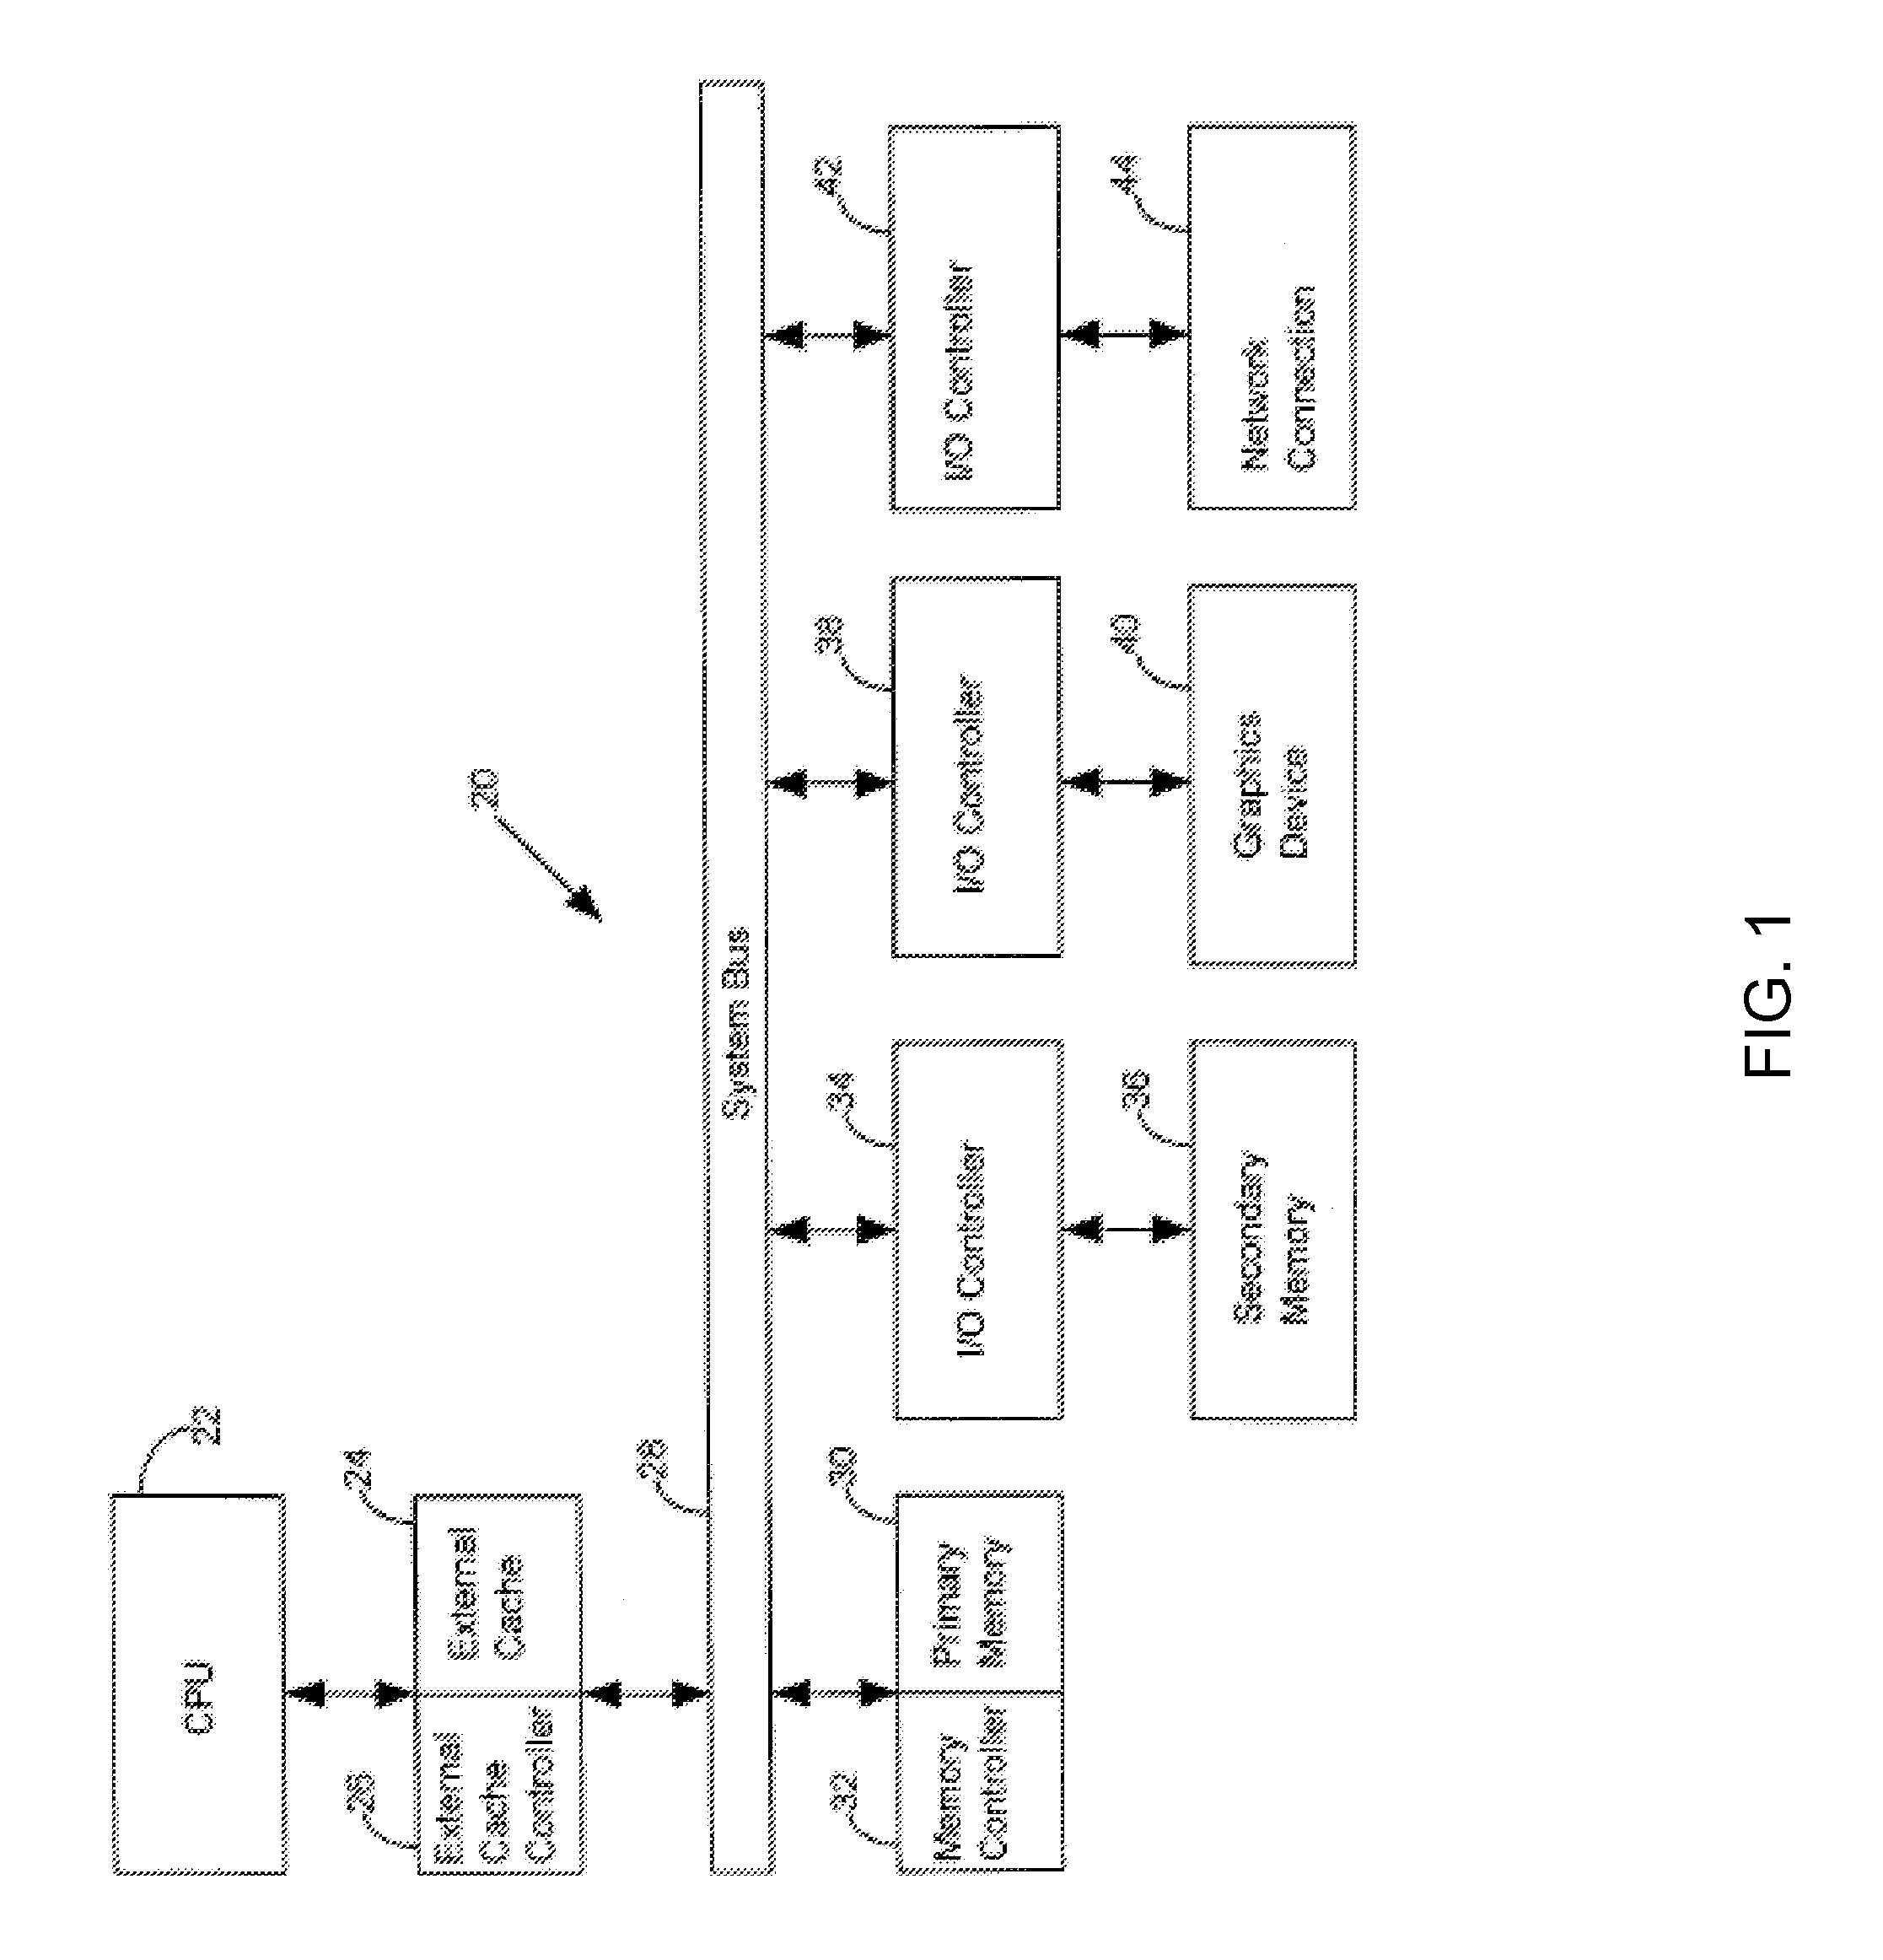 Central processing unit (CPU) architecture and hybrid memory storage system